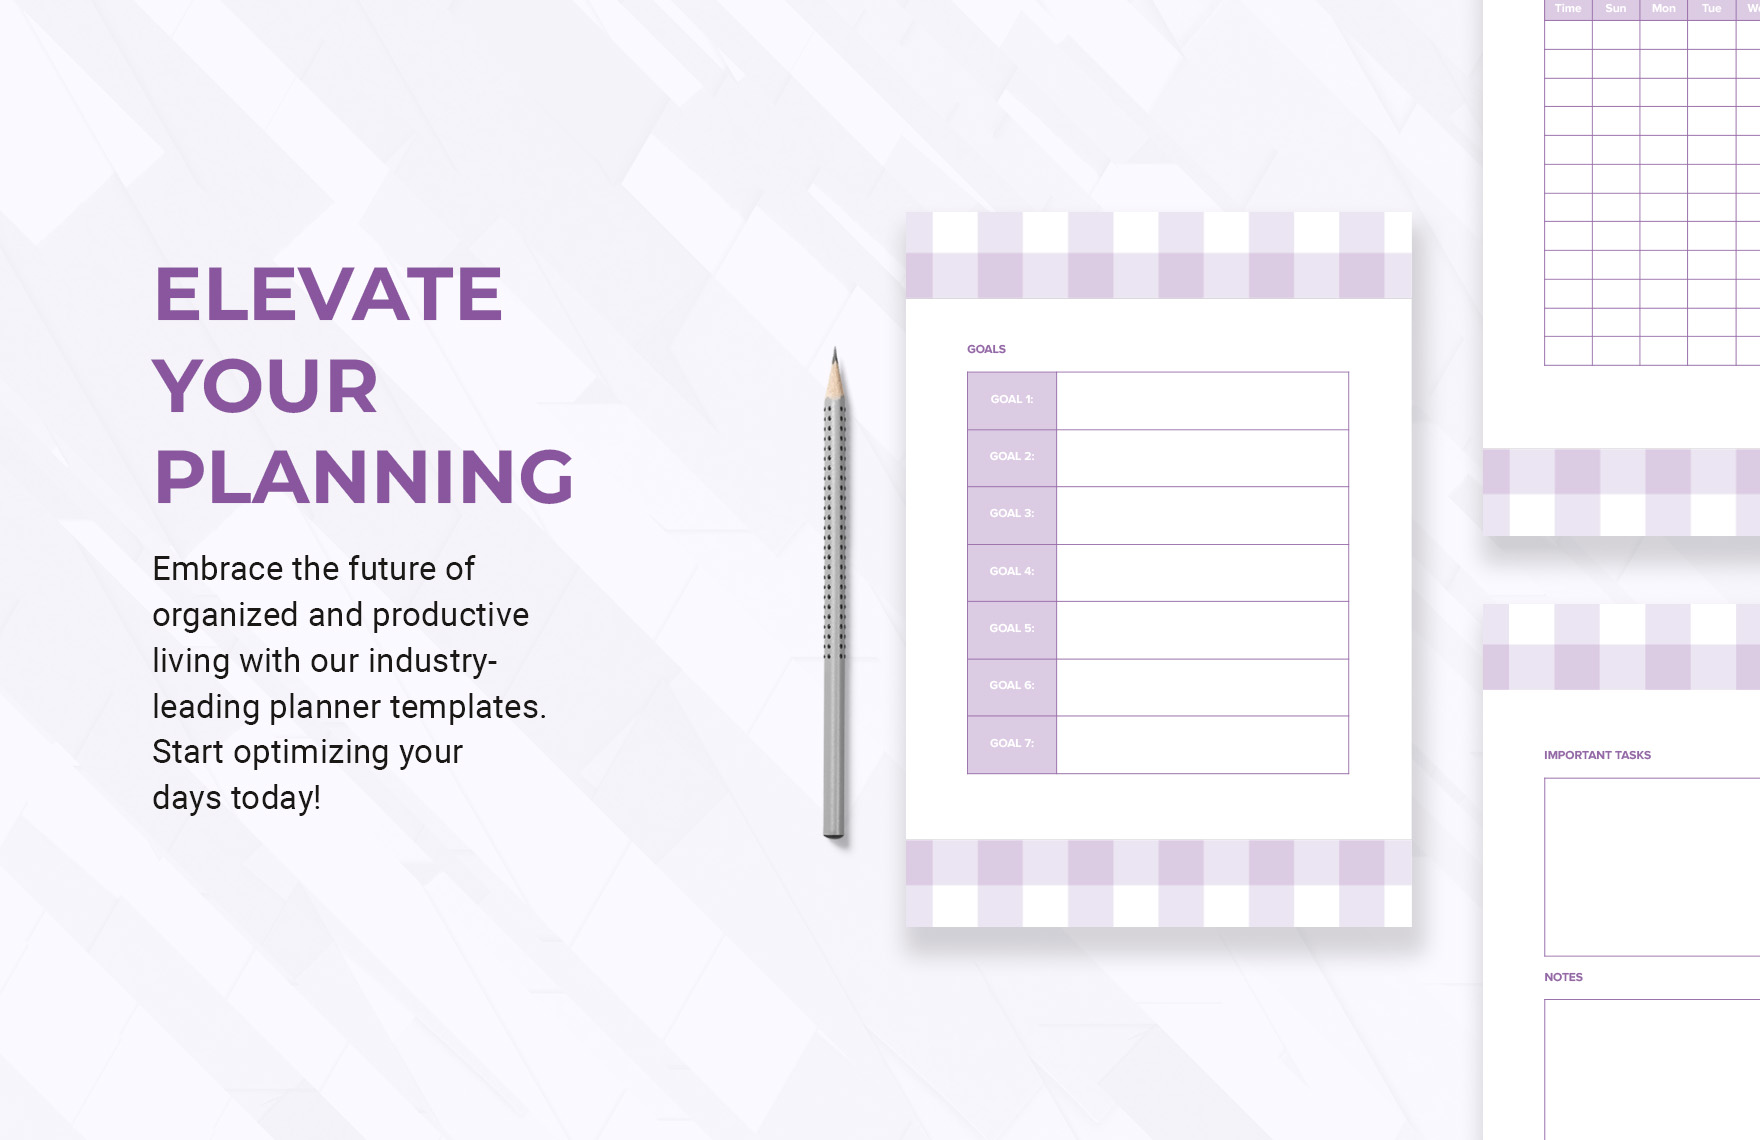 Monthly Planner Template